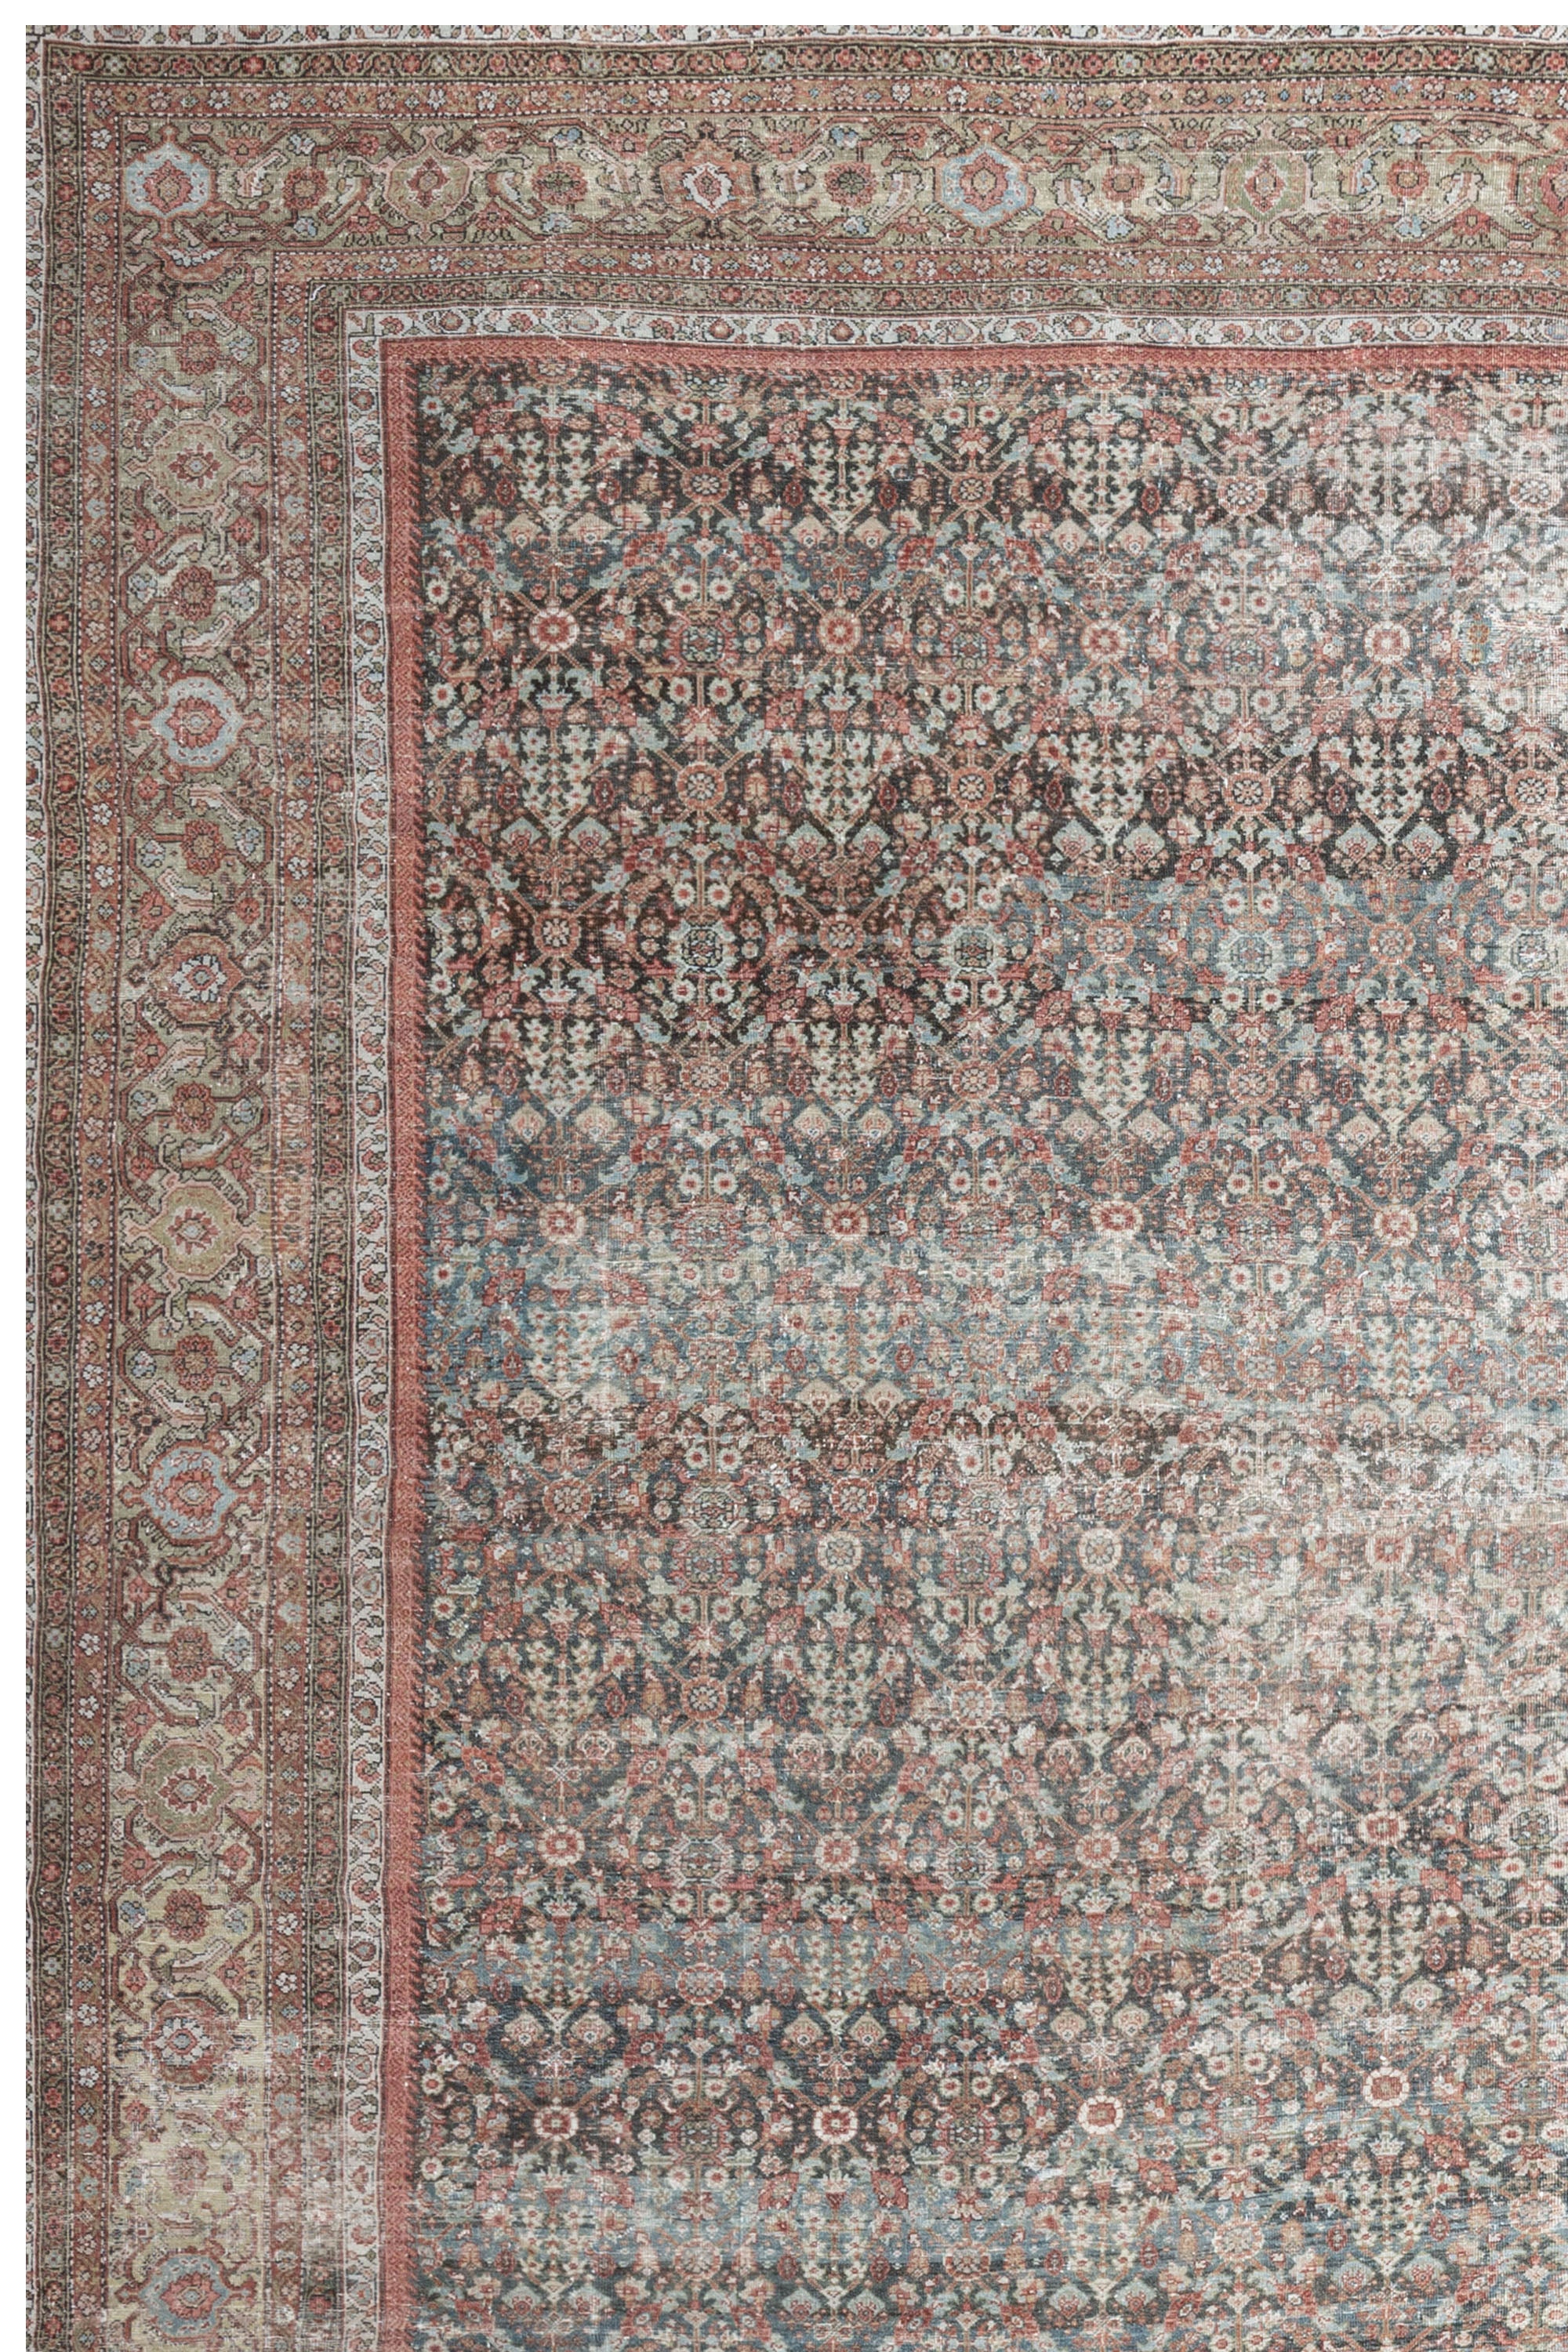 SULTANABAD RUG, AR31268, WEST PERSIA, 15'3" X 24'4" - thumbnail 2